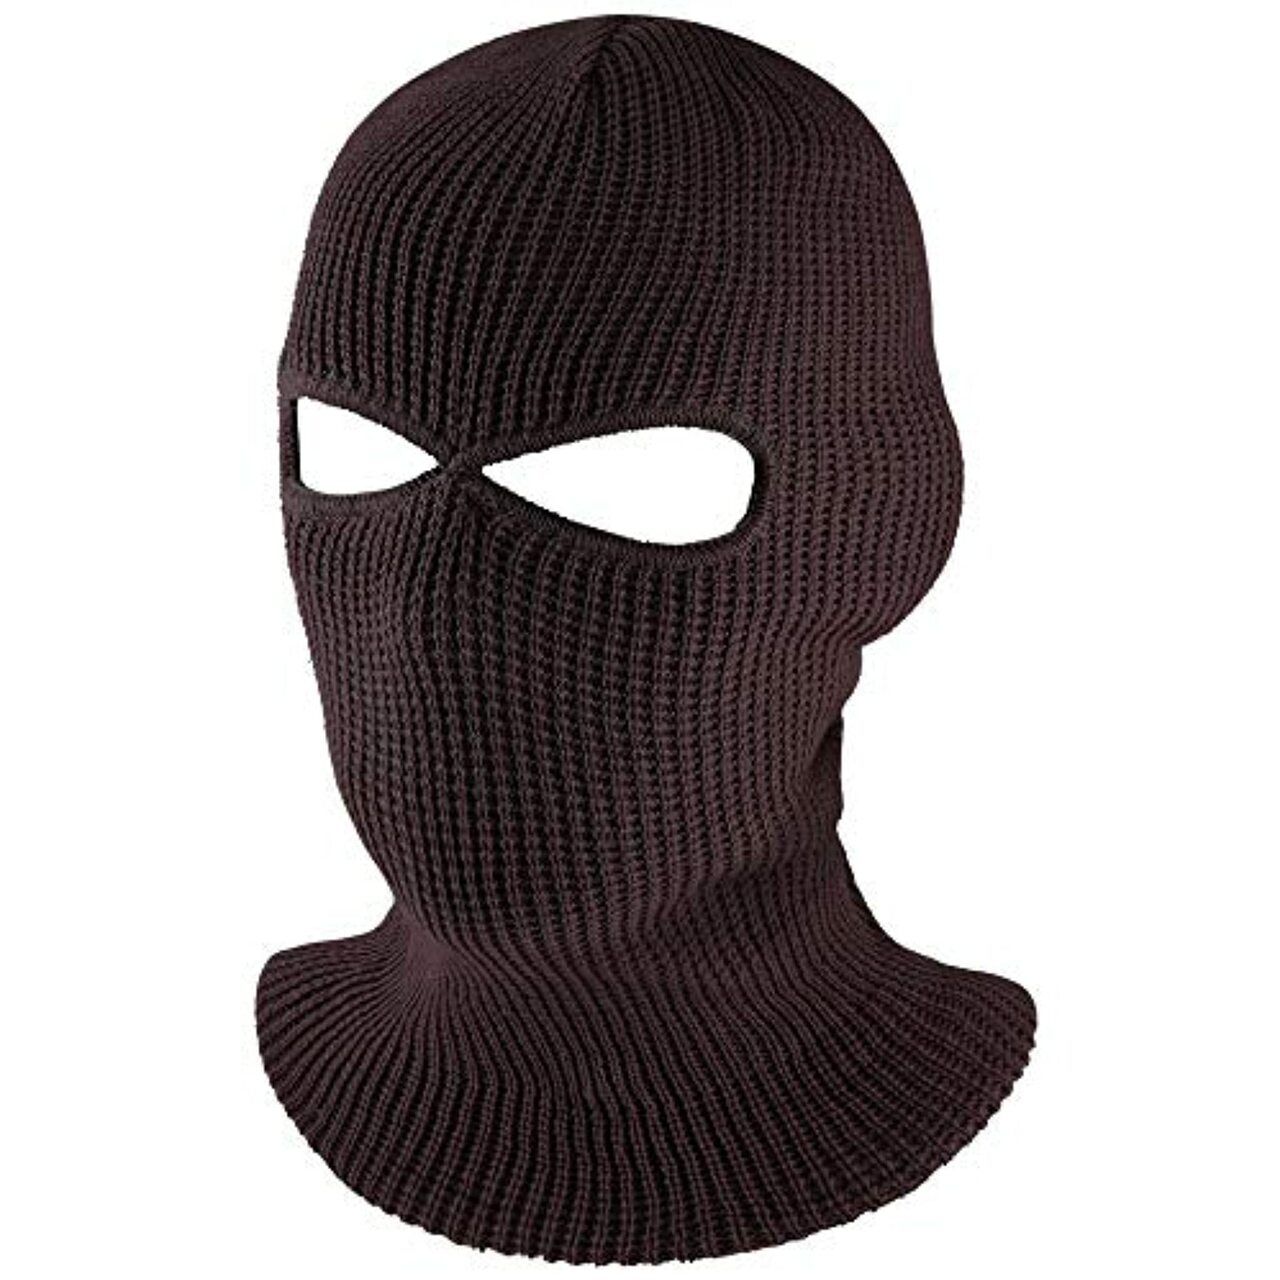 2 Hole Knitted Full Face Cover Ski Mask, Adult Winter Balaclava Warm Knit Full Face Mask For Outdoor Sports